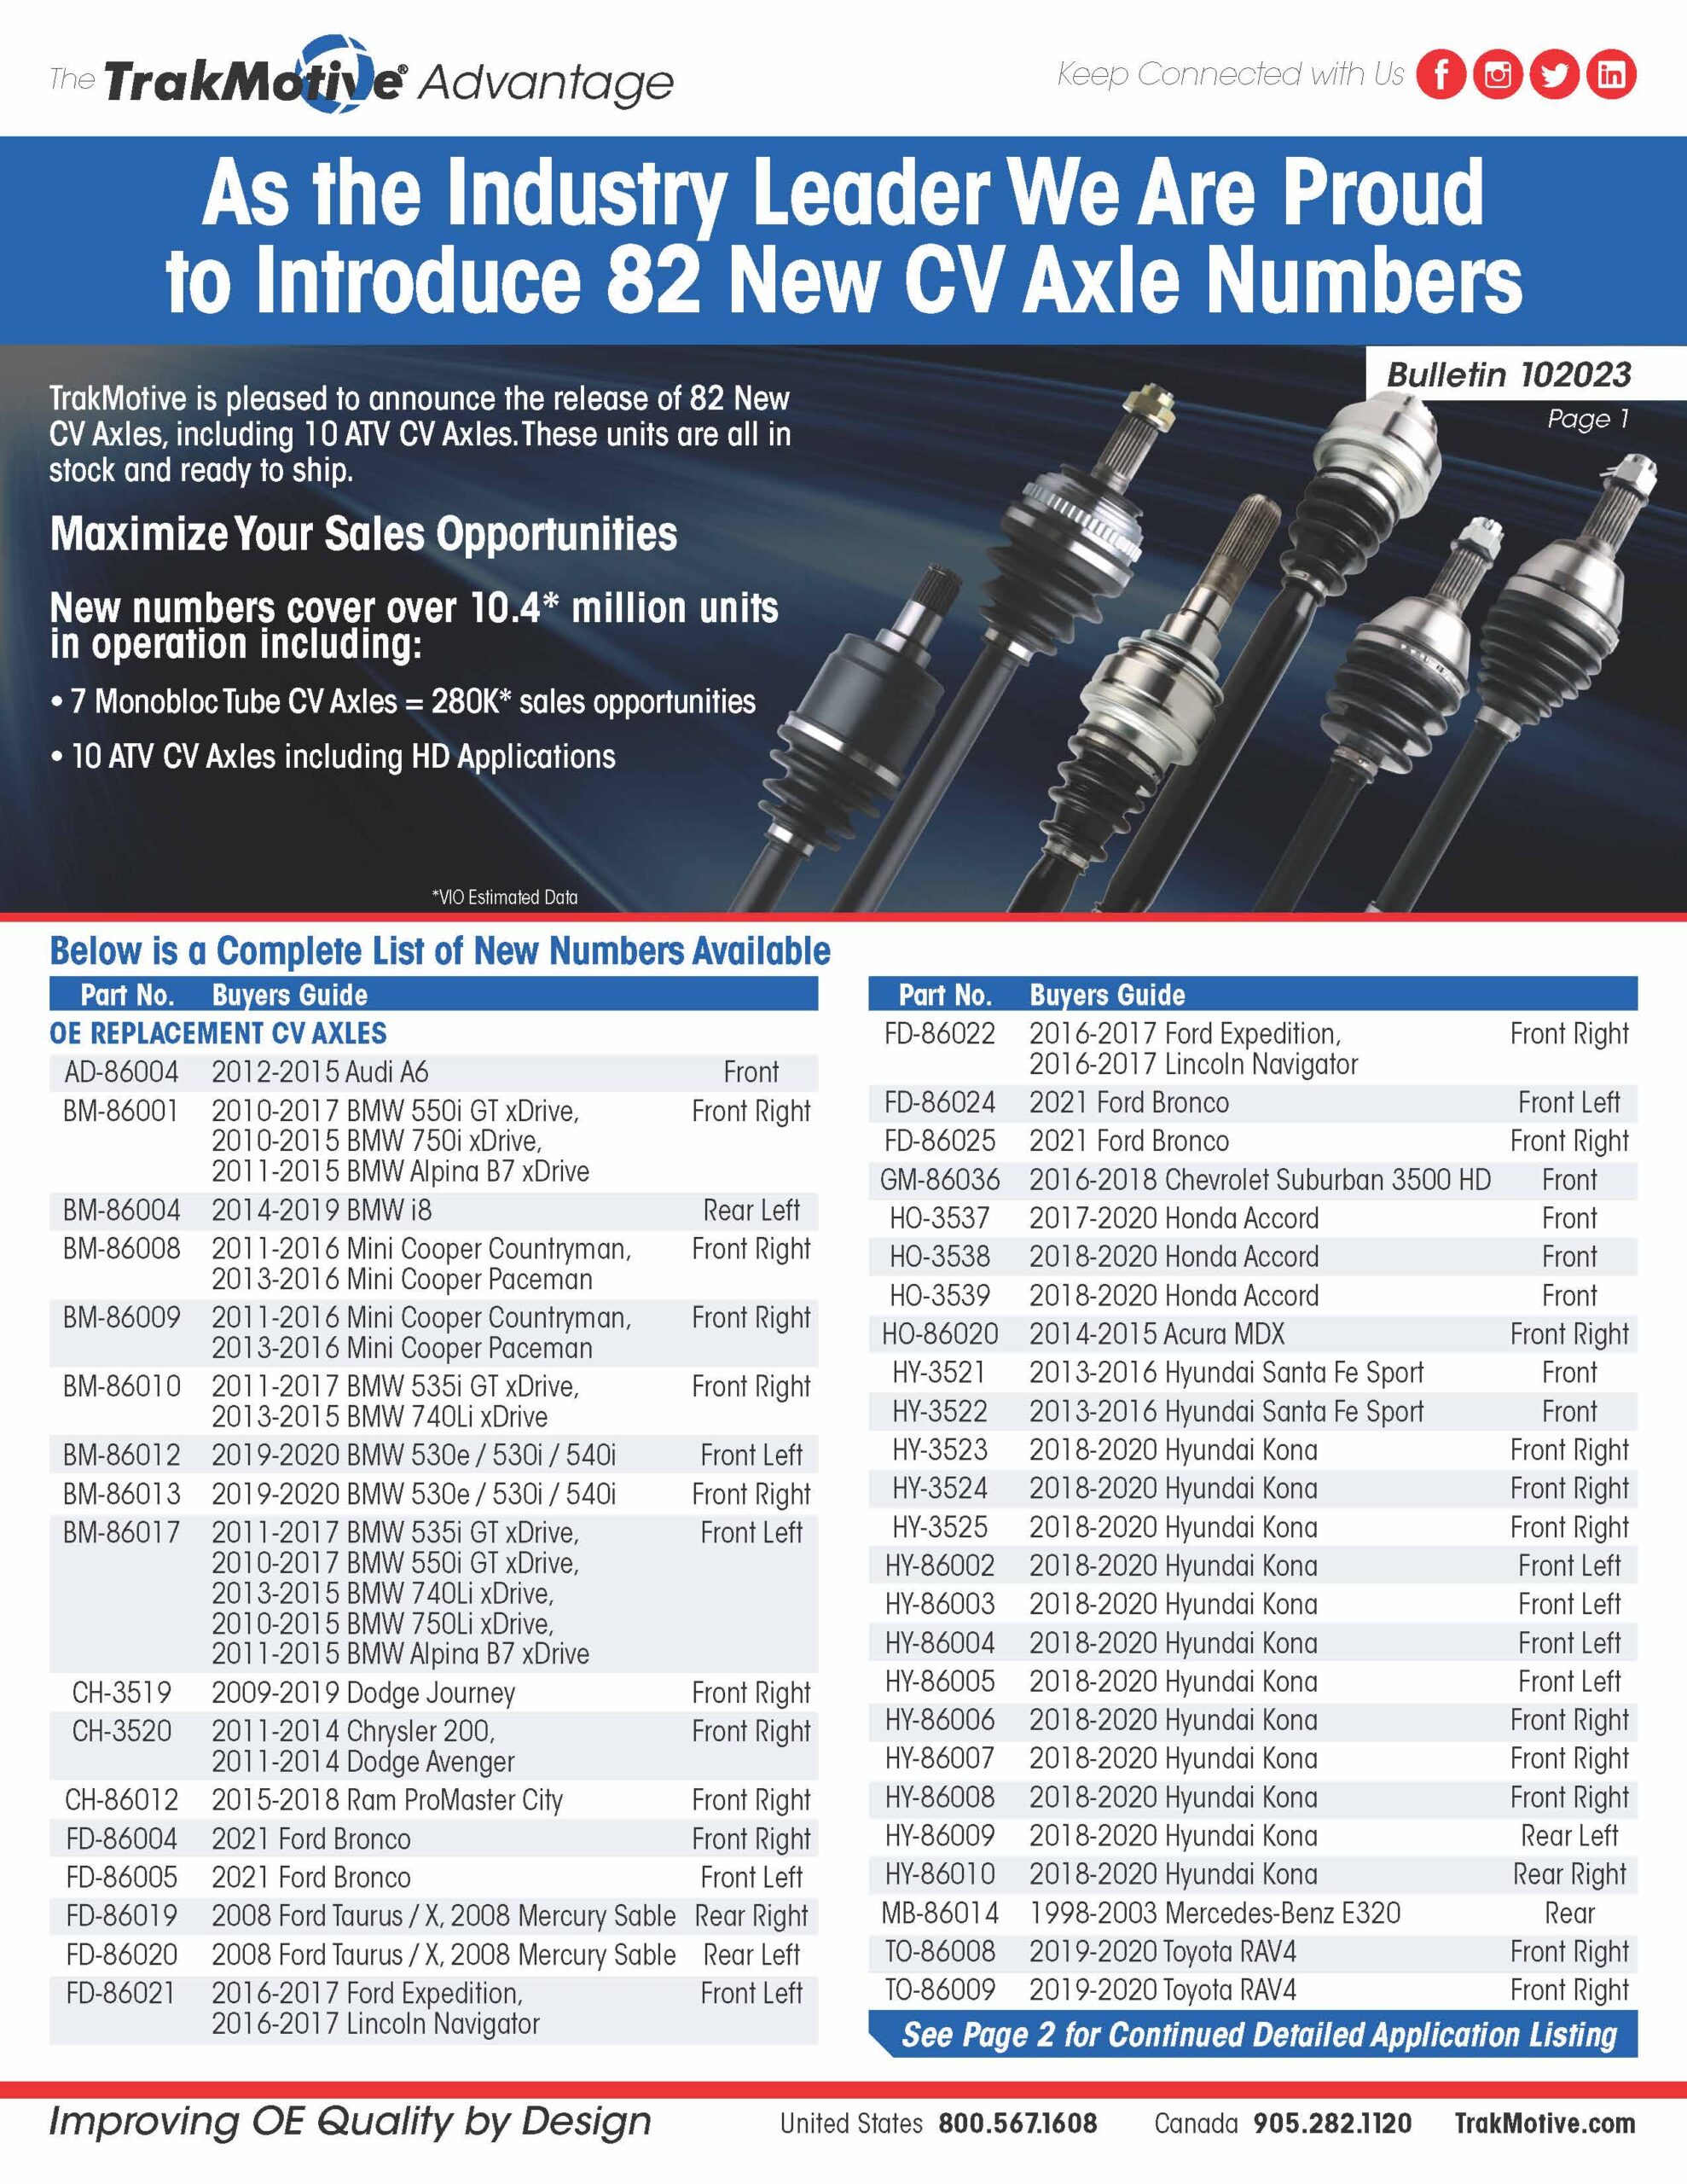 10/2023: TrakMotive Adds 82 New CV Axle Numbers